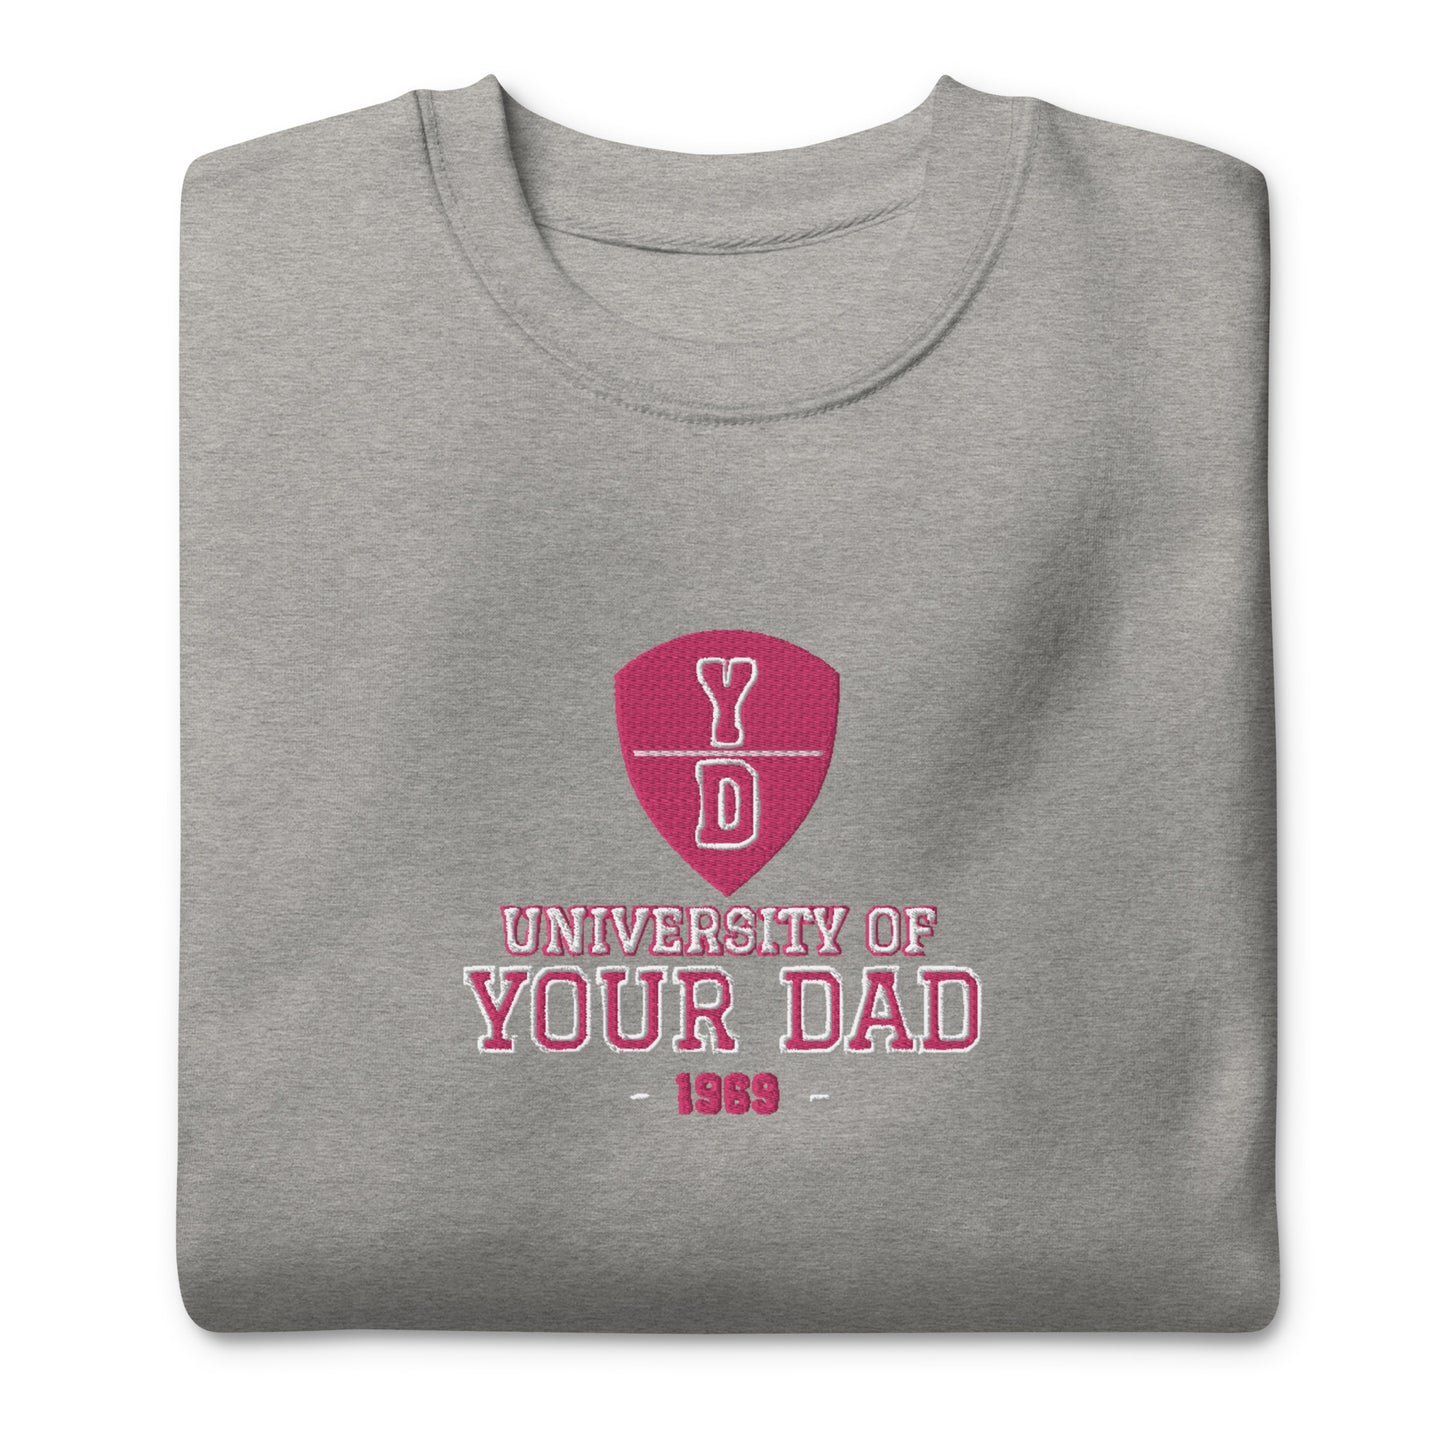 University of YOUR DAD Embroidered Crewneck